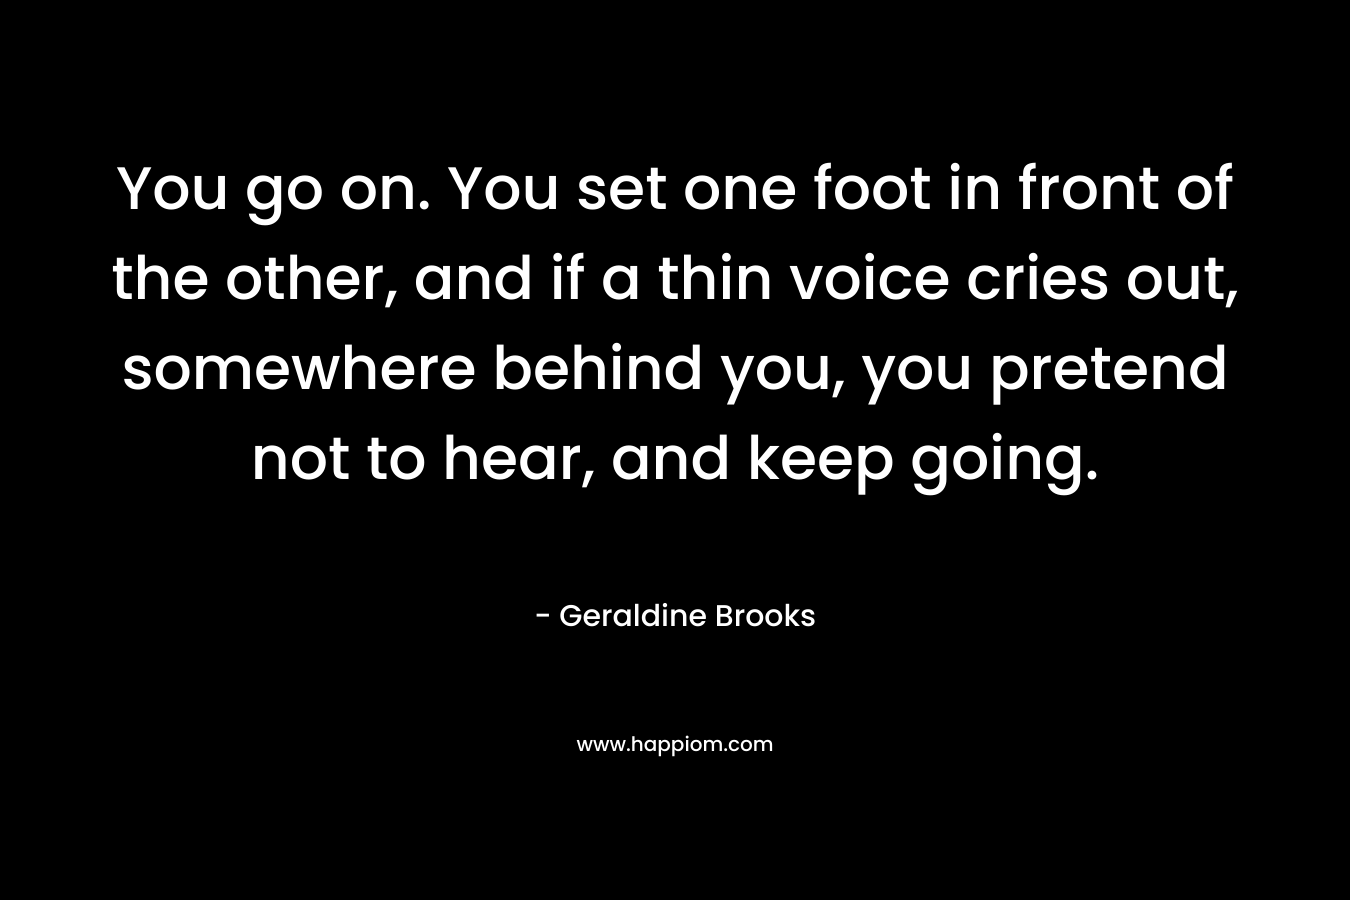 You go on. You set one foot in front of the other, and if a thin voice cries out, somewhere behind you, you pretend not to hear, and keep going.